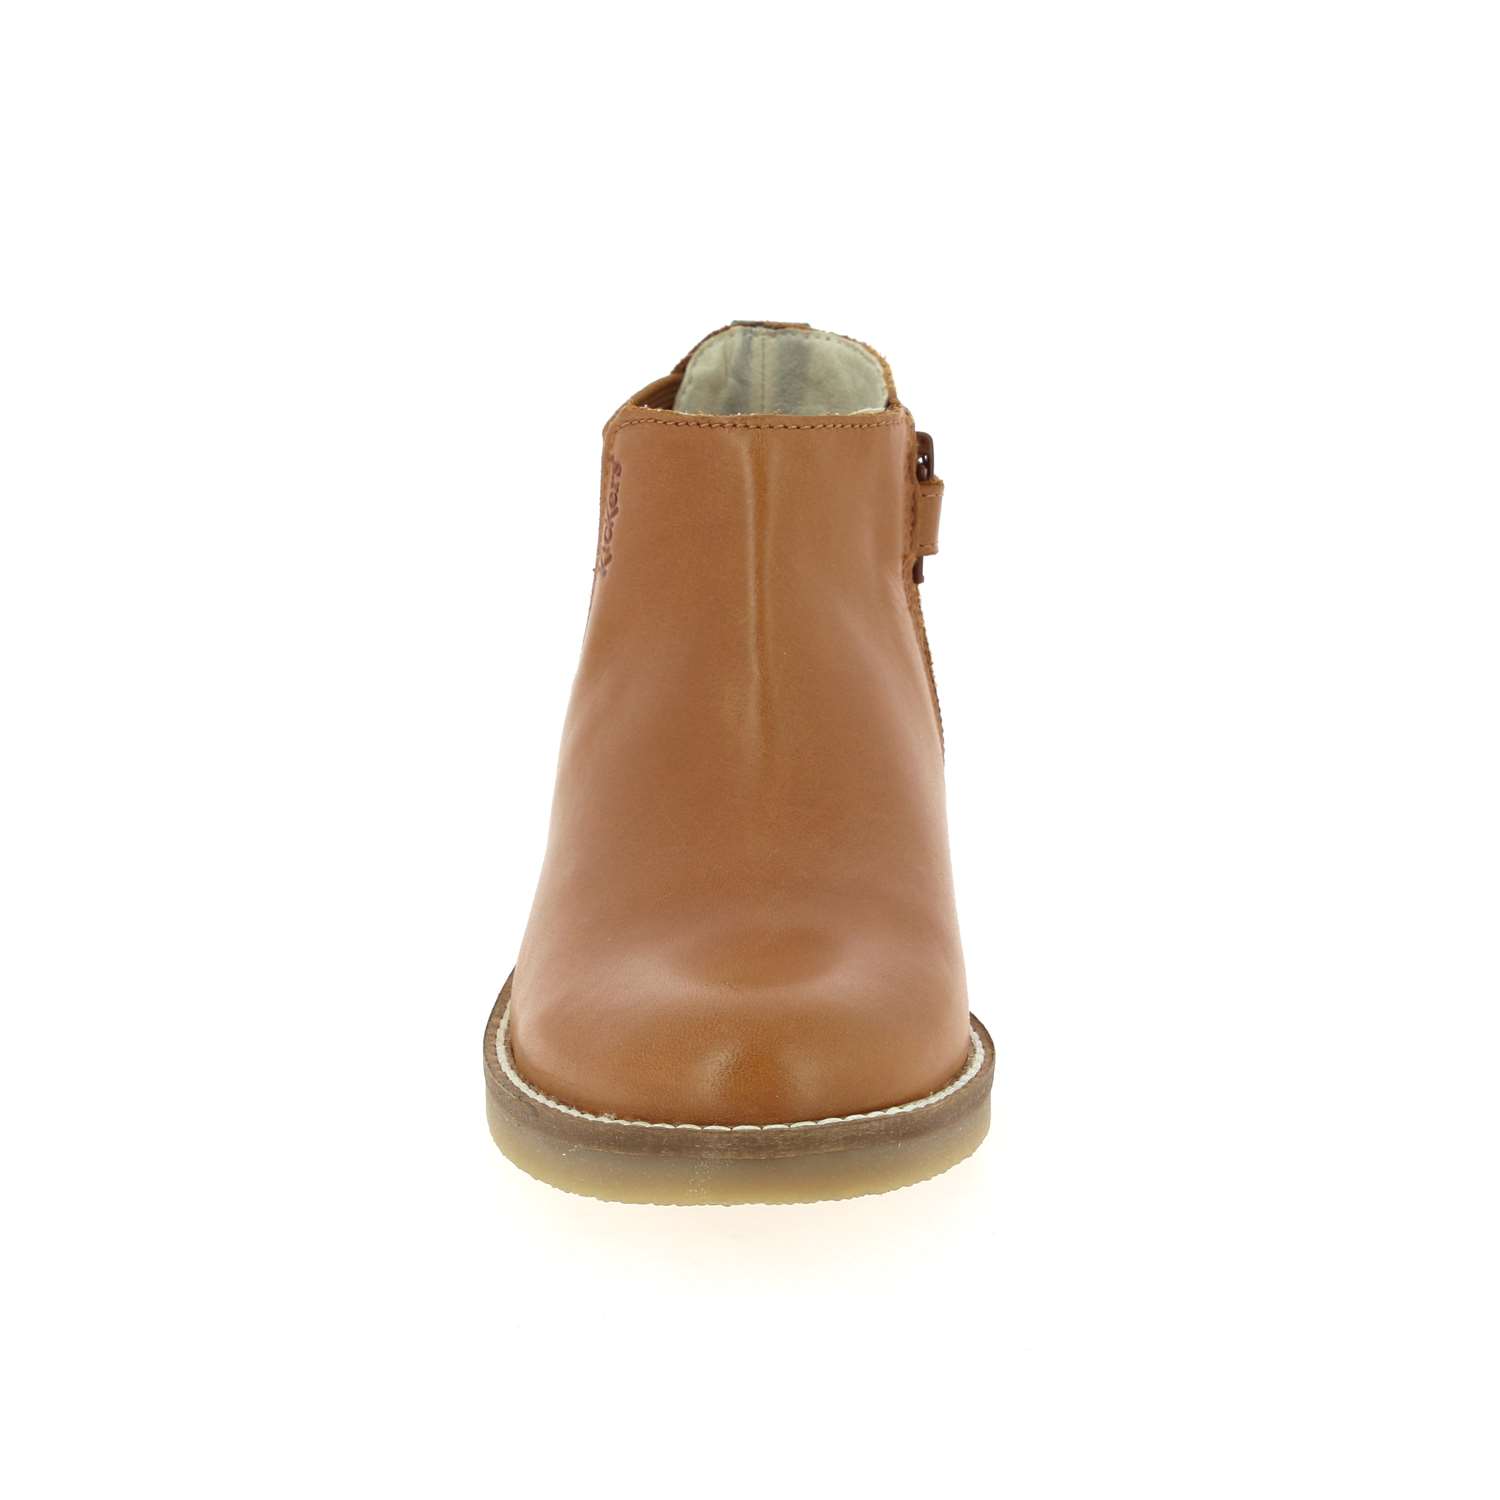 03 - NYCCO - KICKERS - Boots et bottines - Cuir